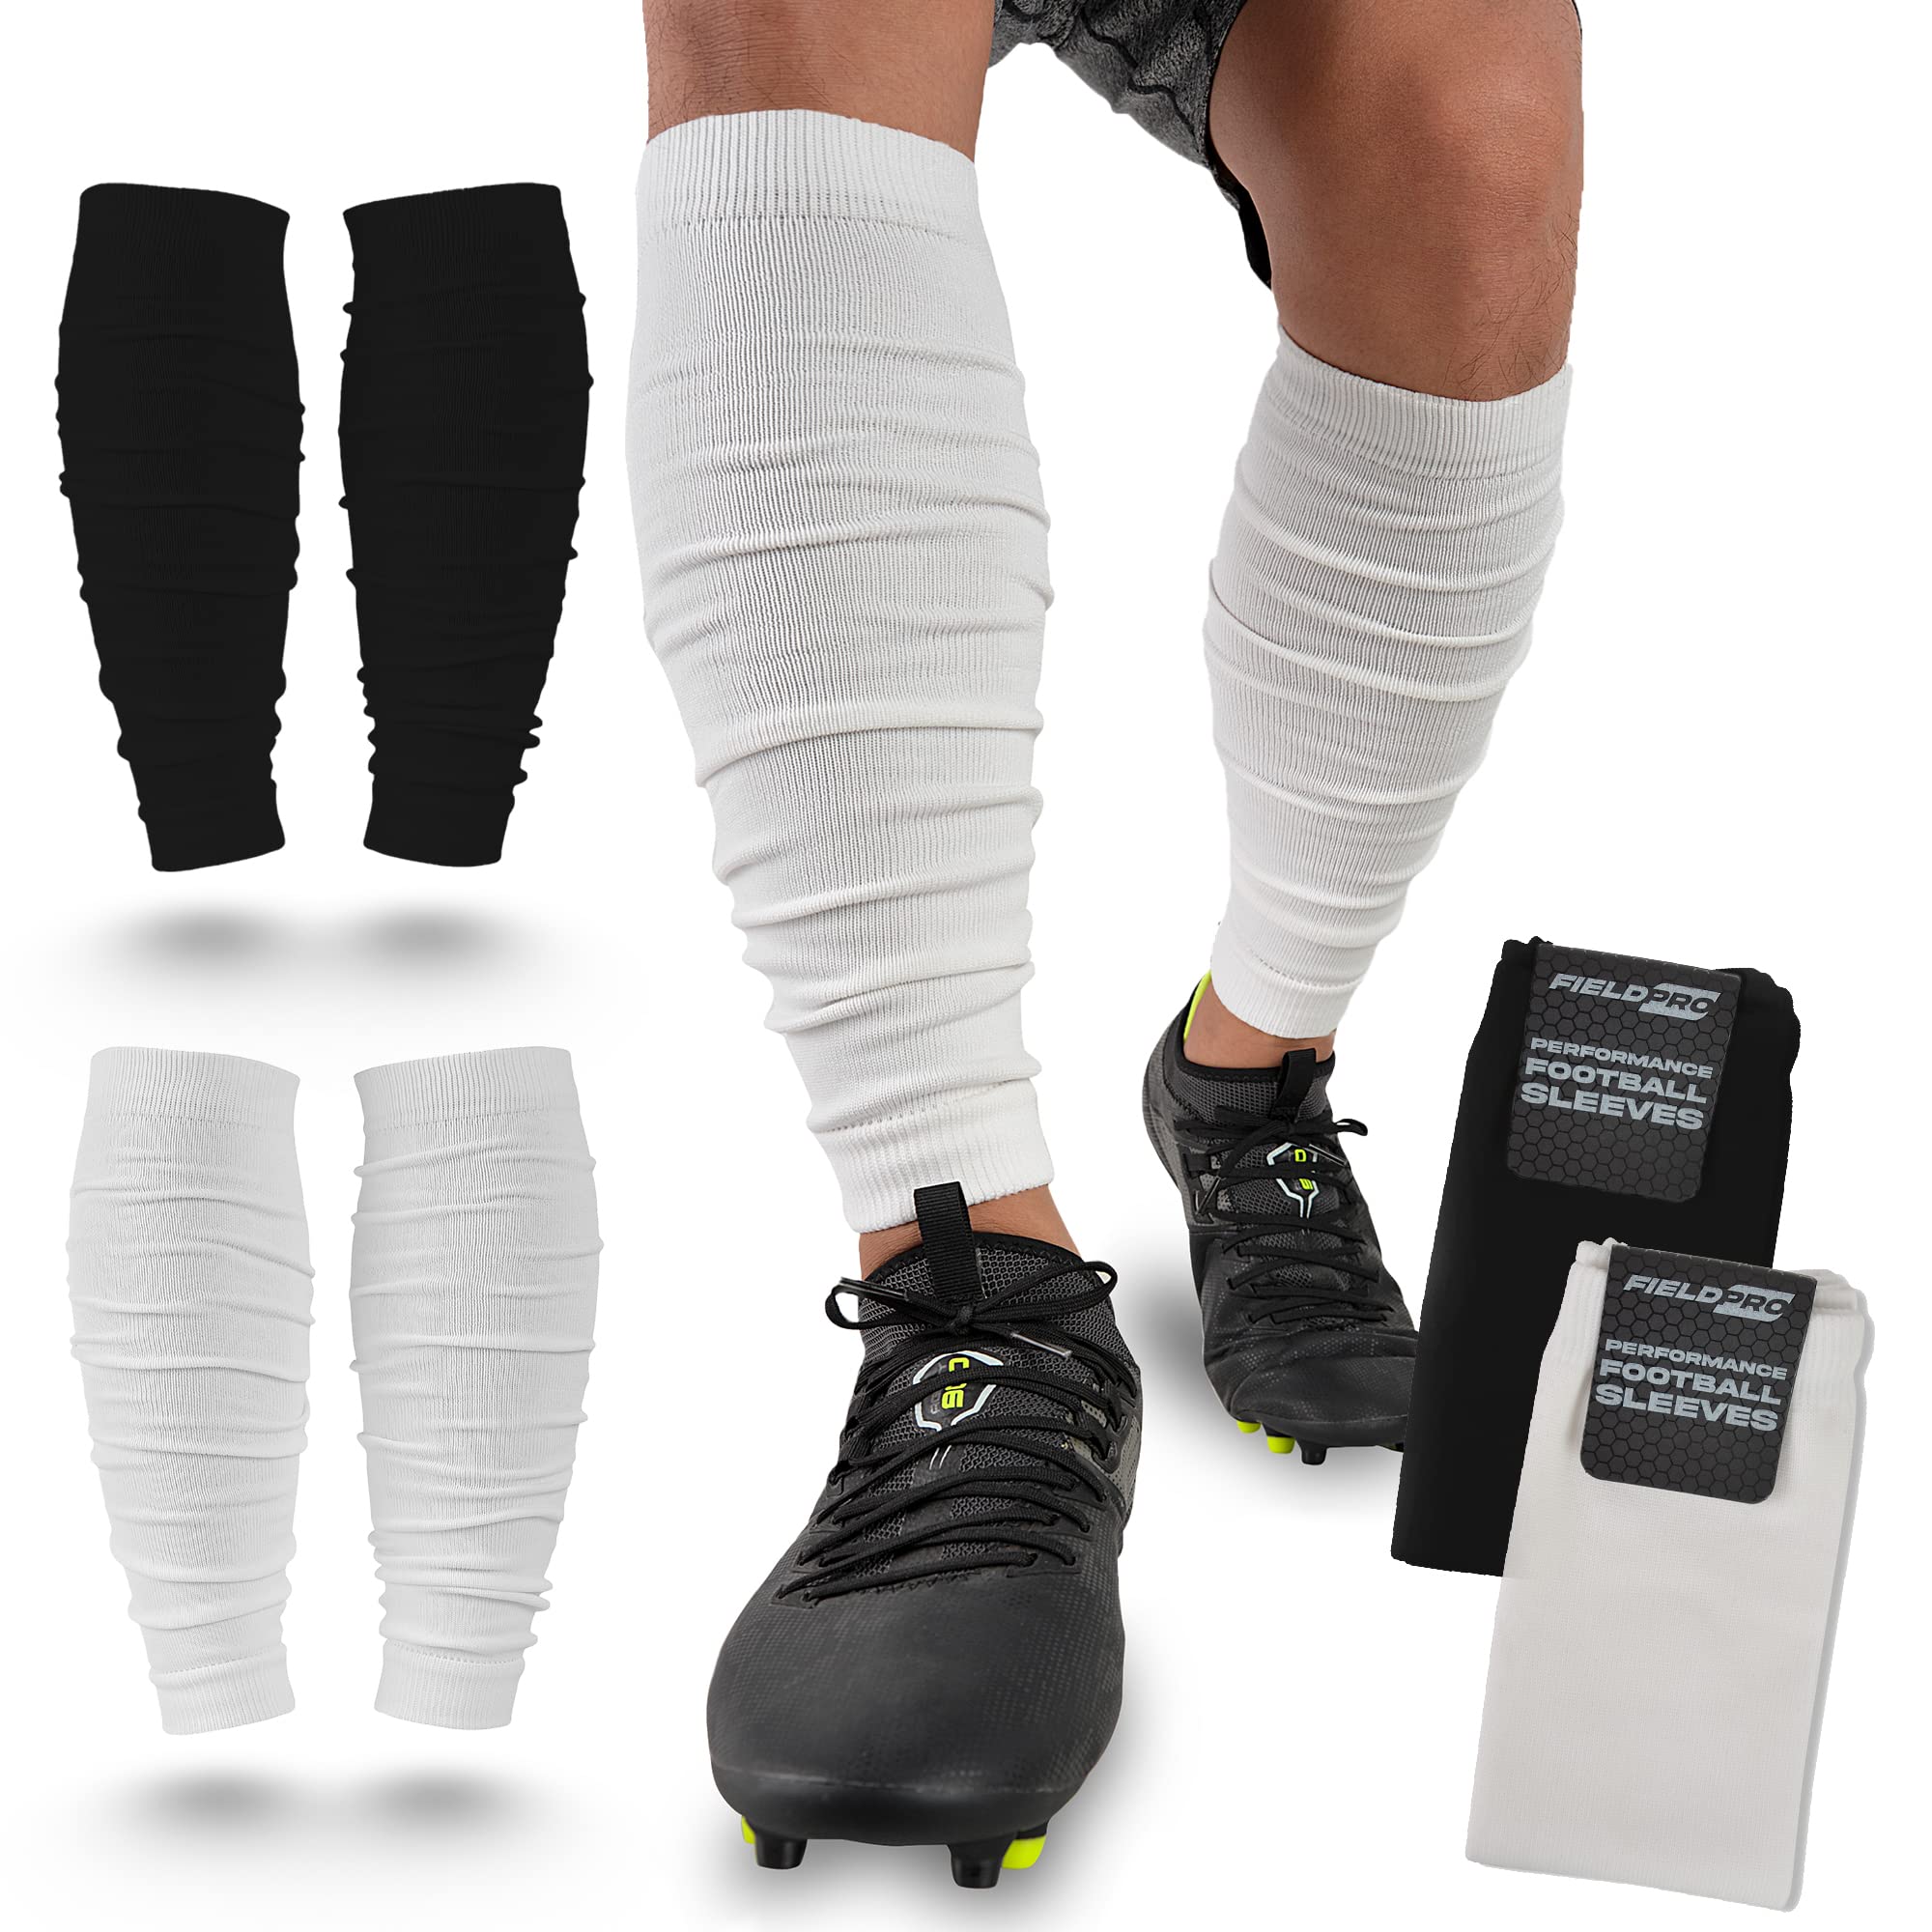 FieldPro Football Leg Sleeve for Adult & Youth - 2 Pairs, 6 Colors